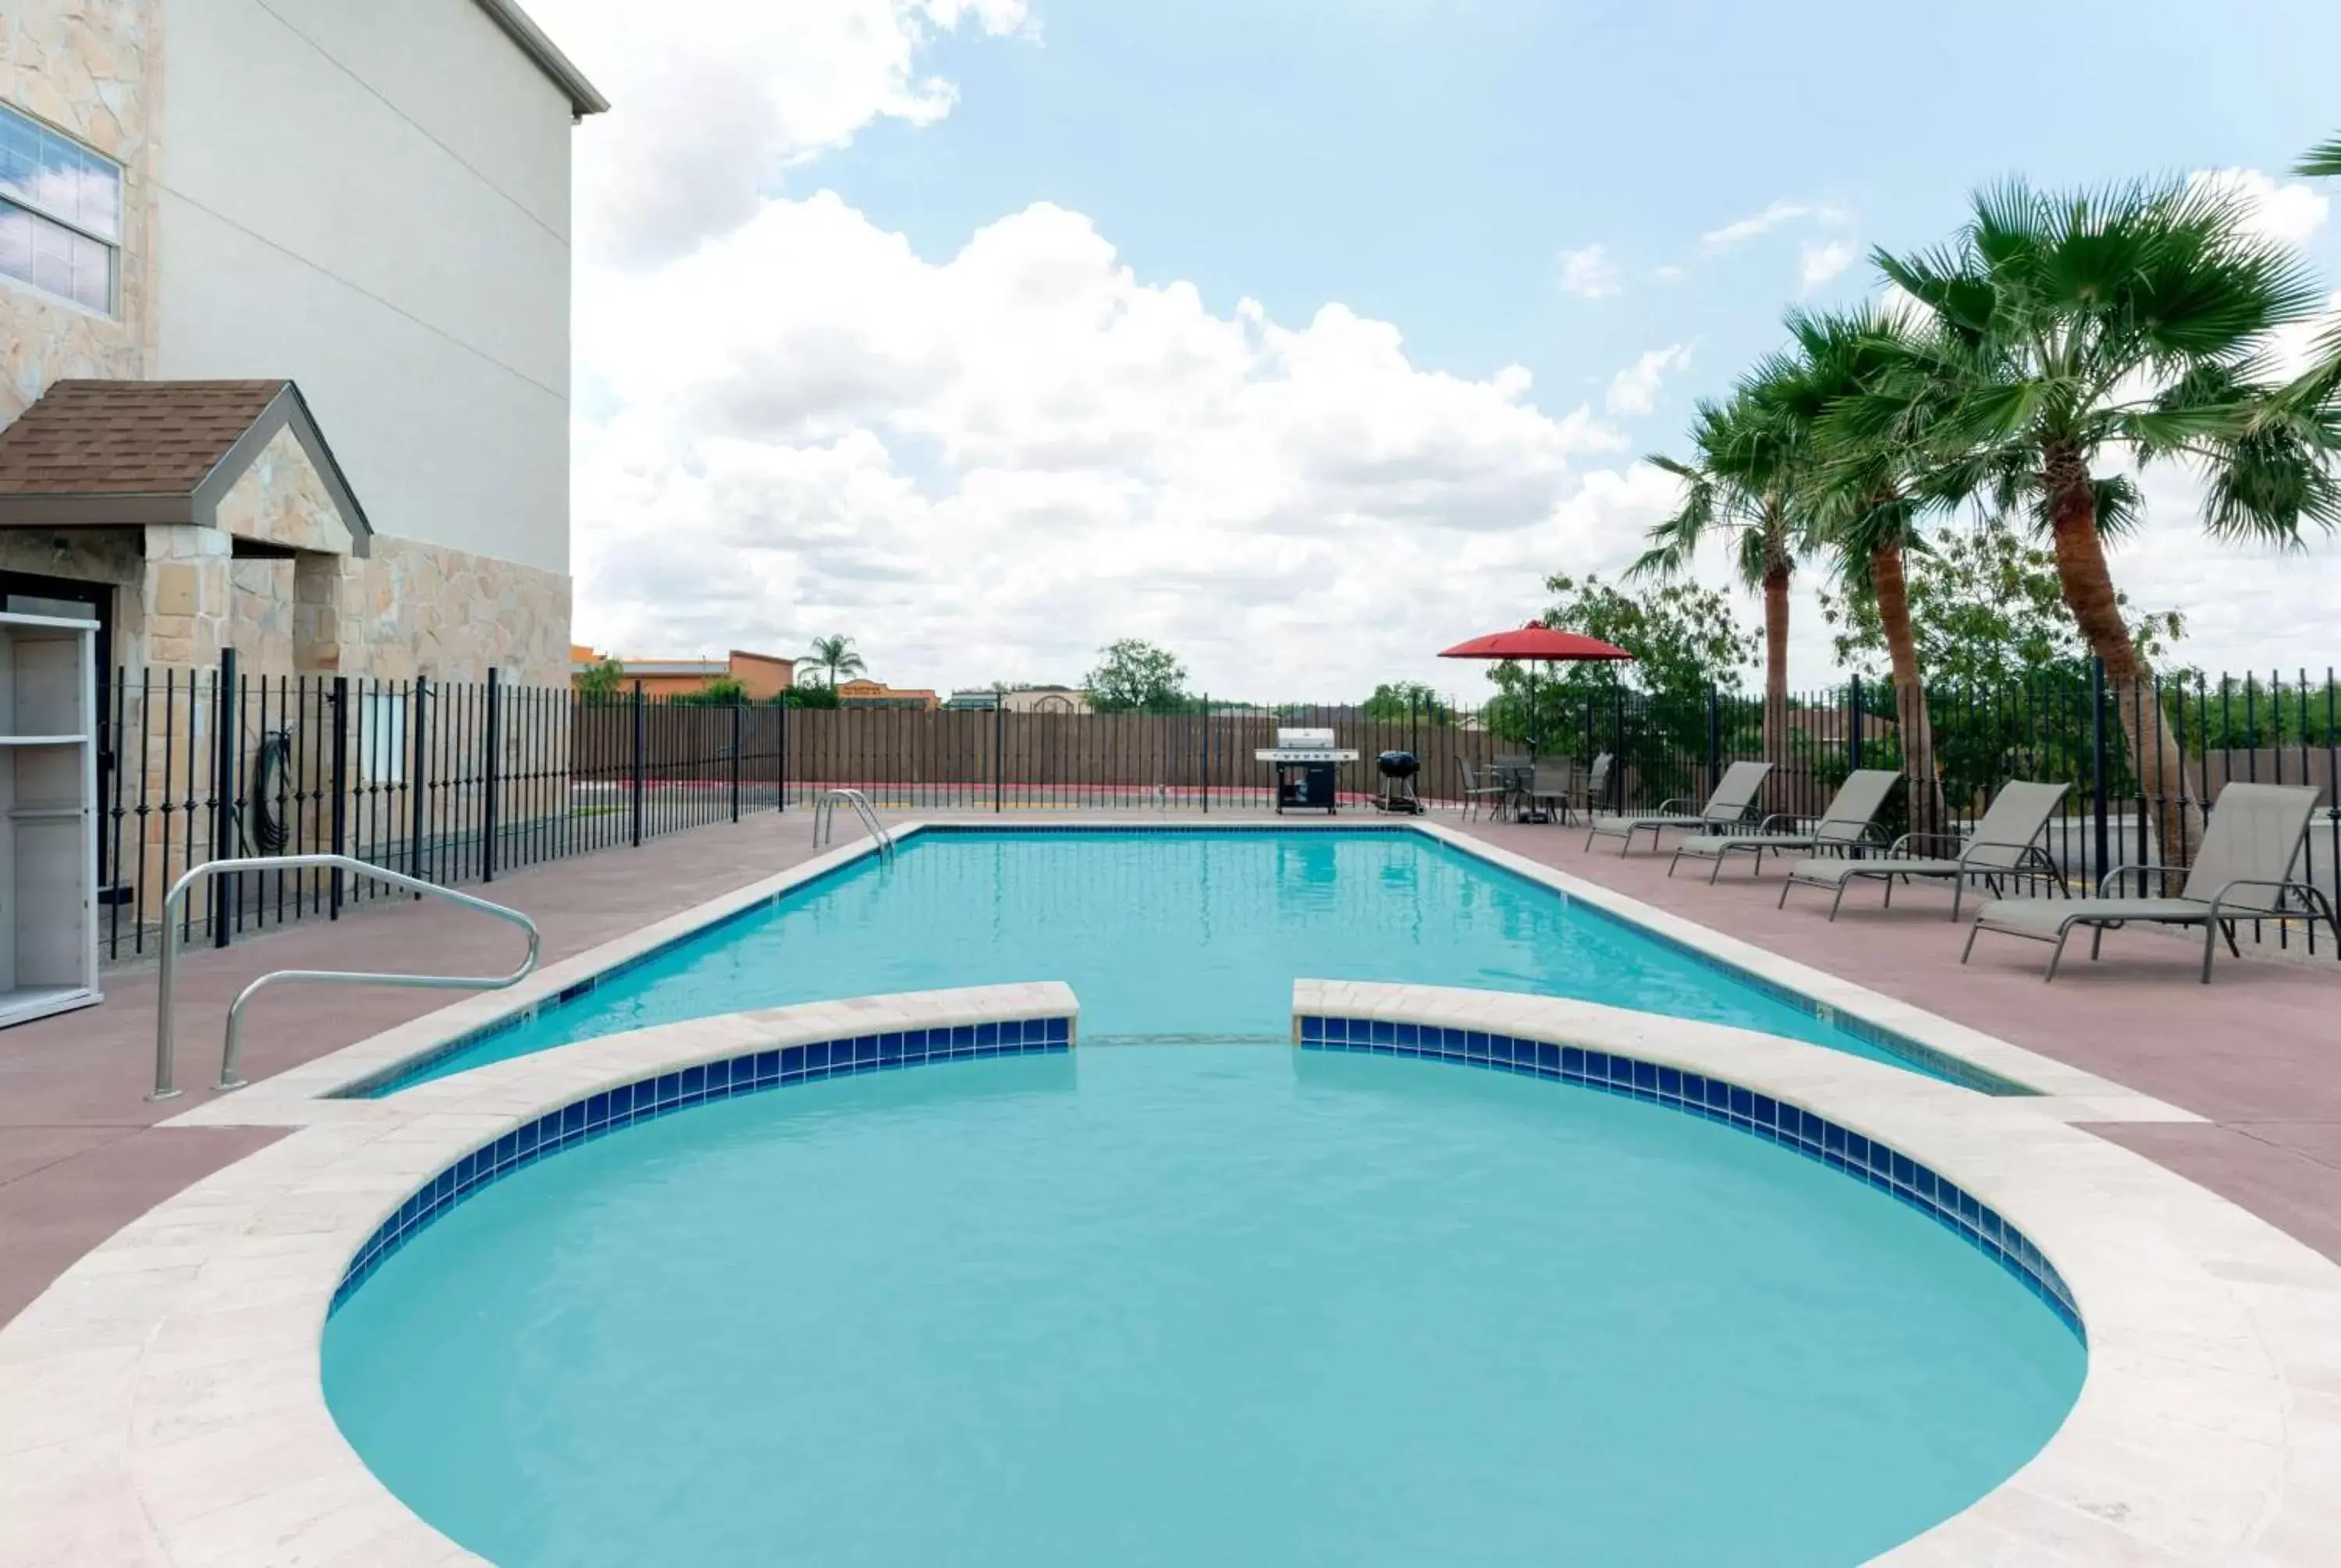 On site, Swimming Pool in Microtel Inn and Suites Eagle Pass